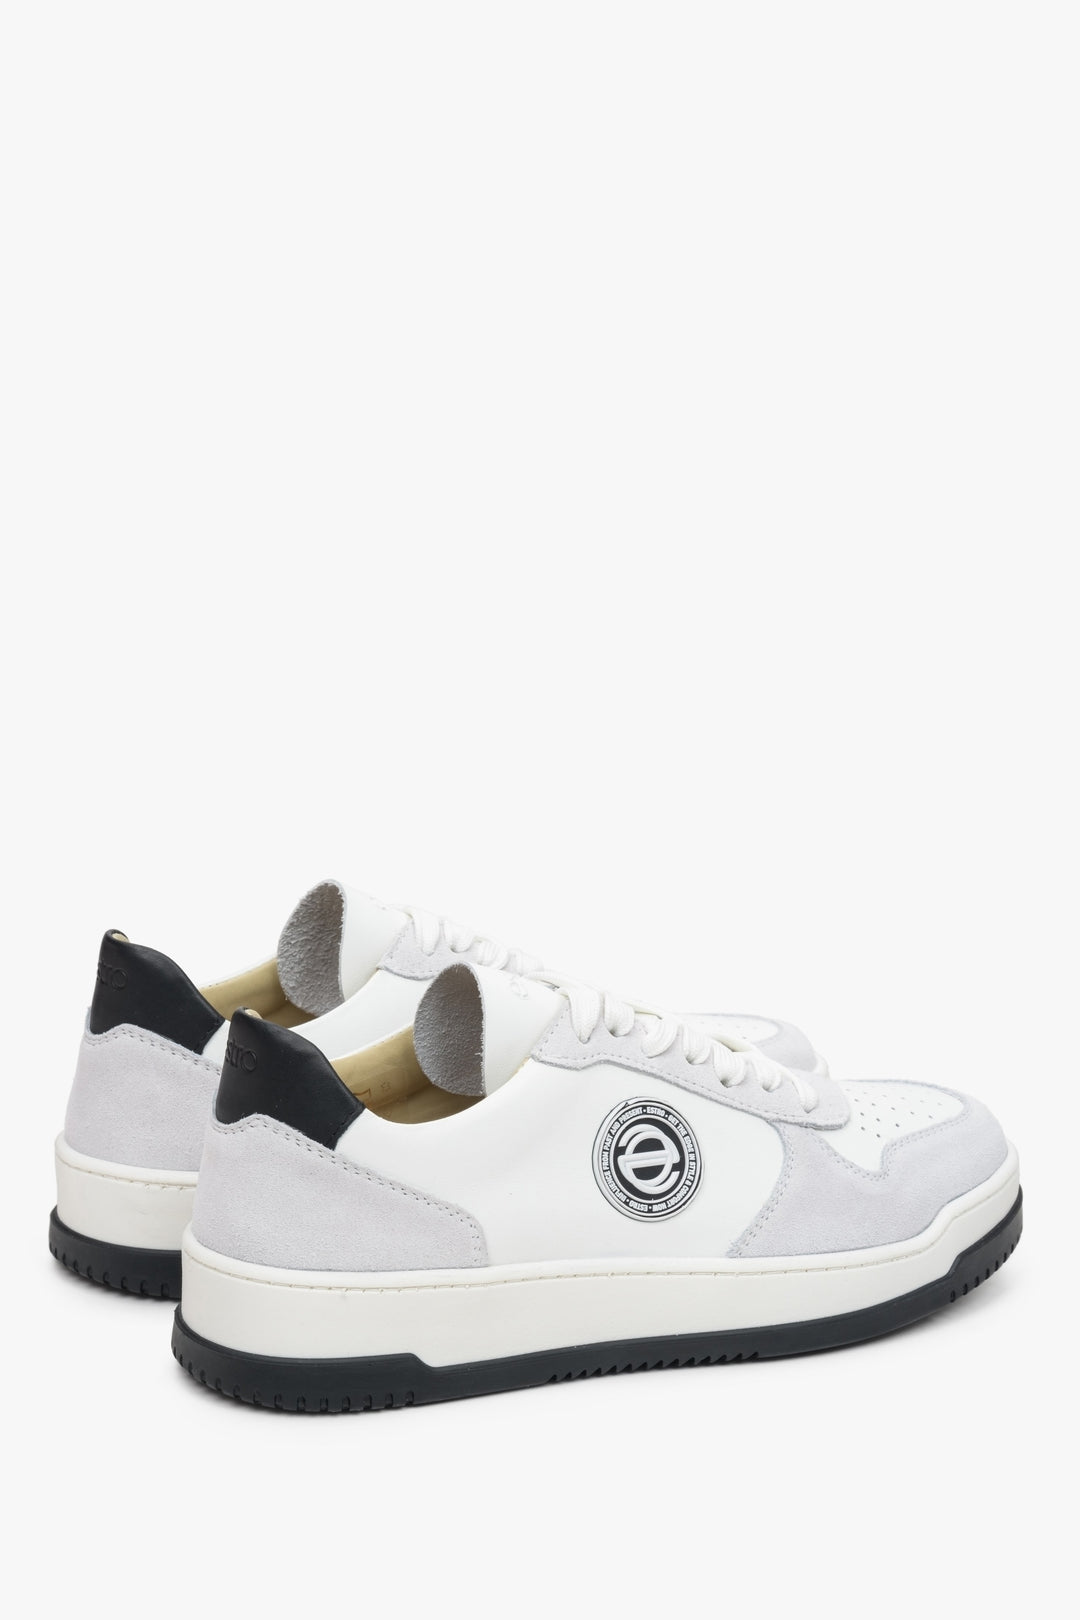 Grey-and-white leather women's sneakers with laces by Estro - close-up on the heel and side seam.